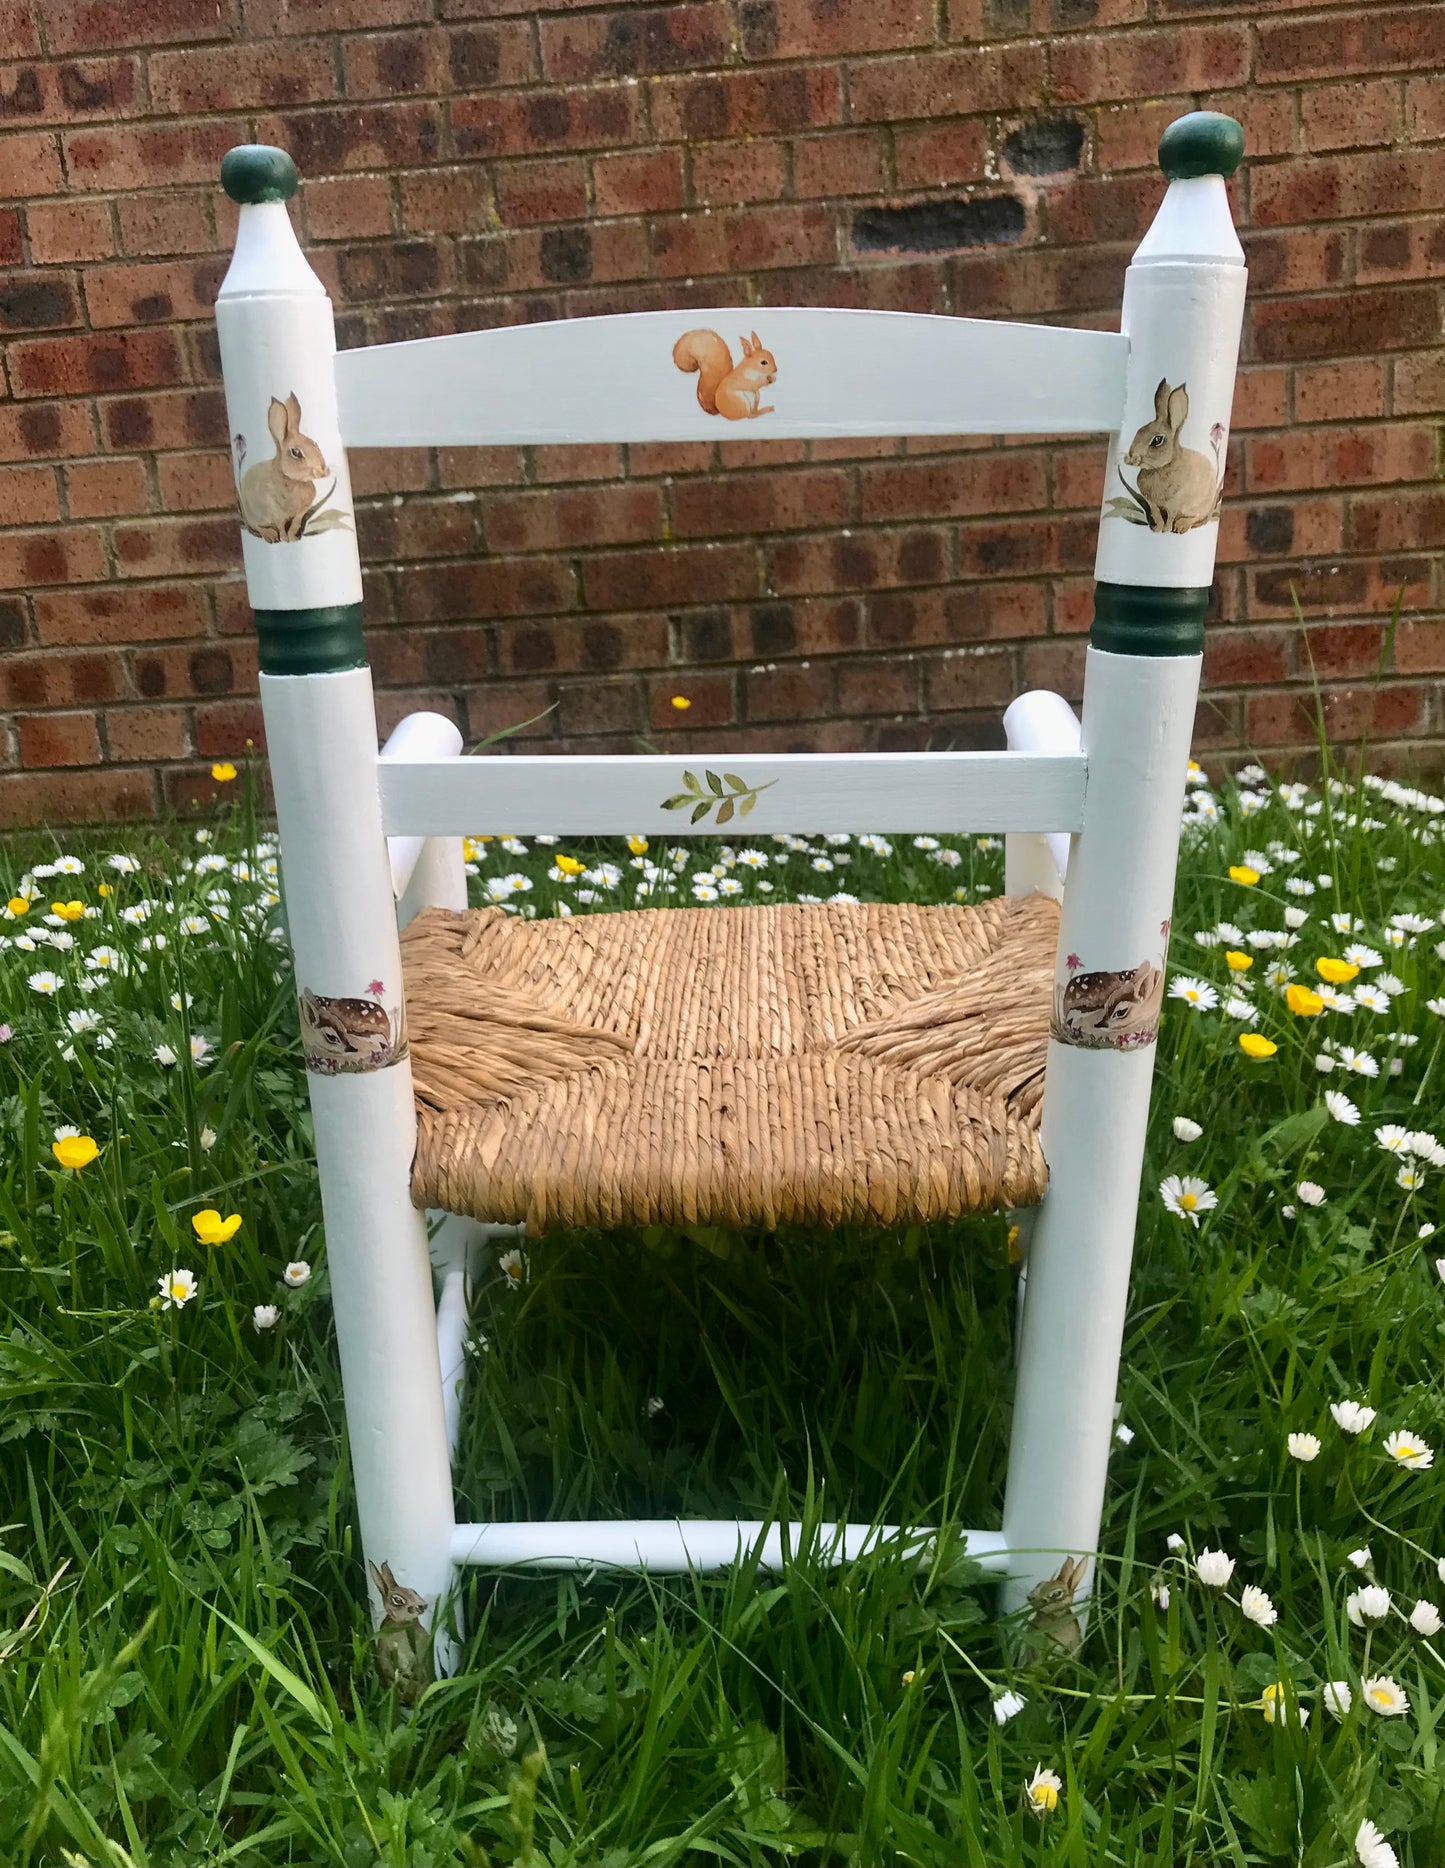 Rush seat personalised children's chair - Forest Glade theme - made to order